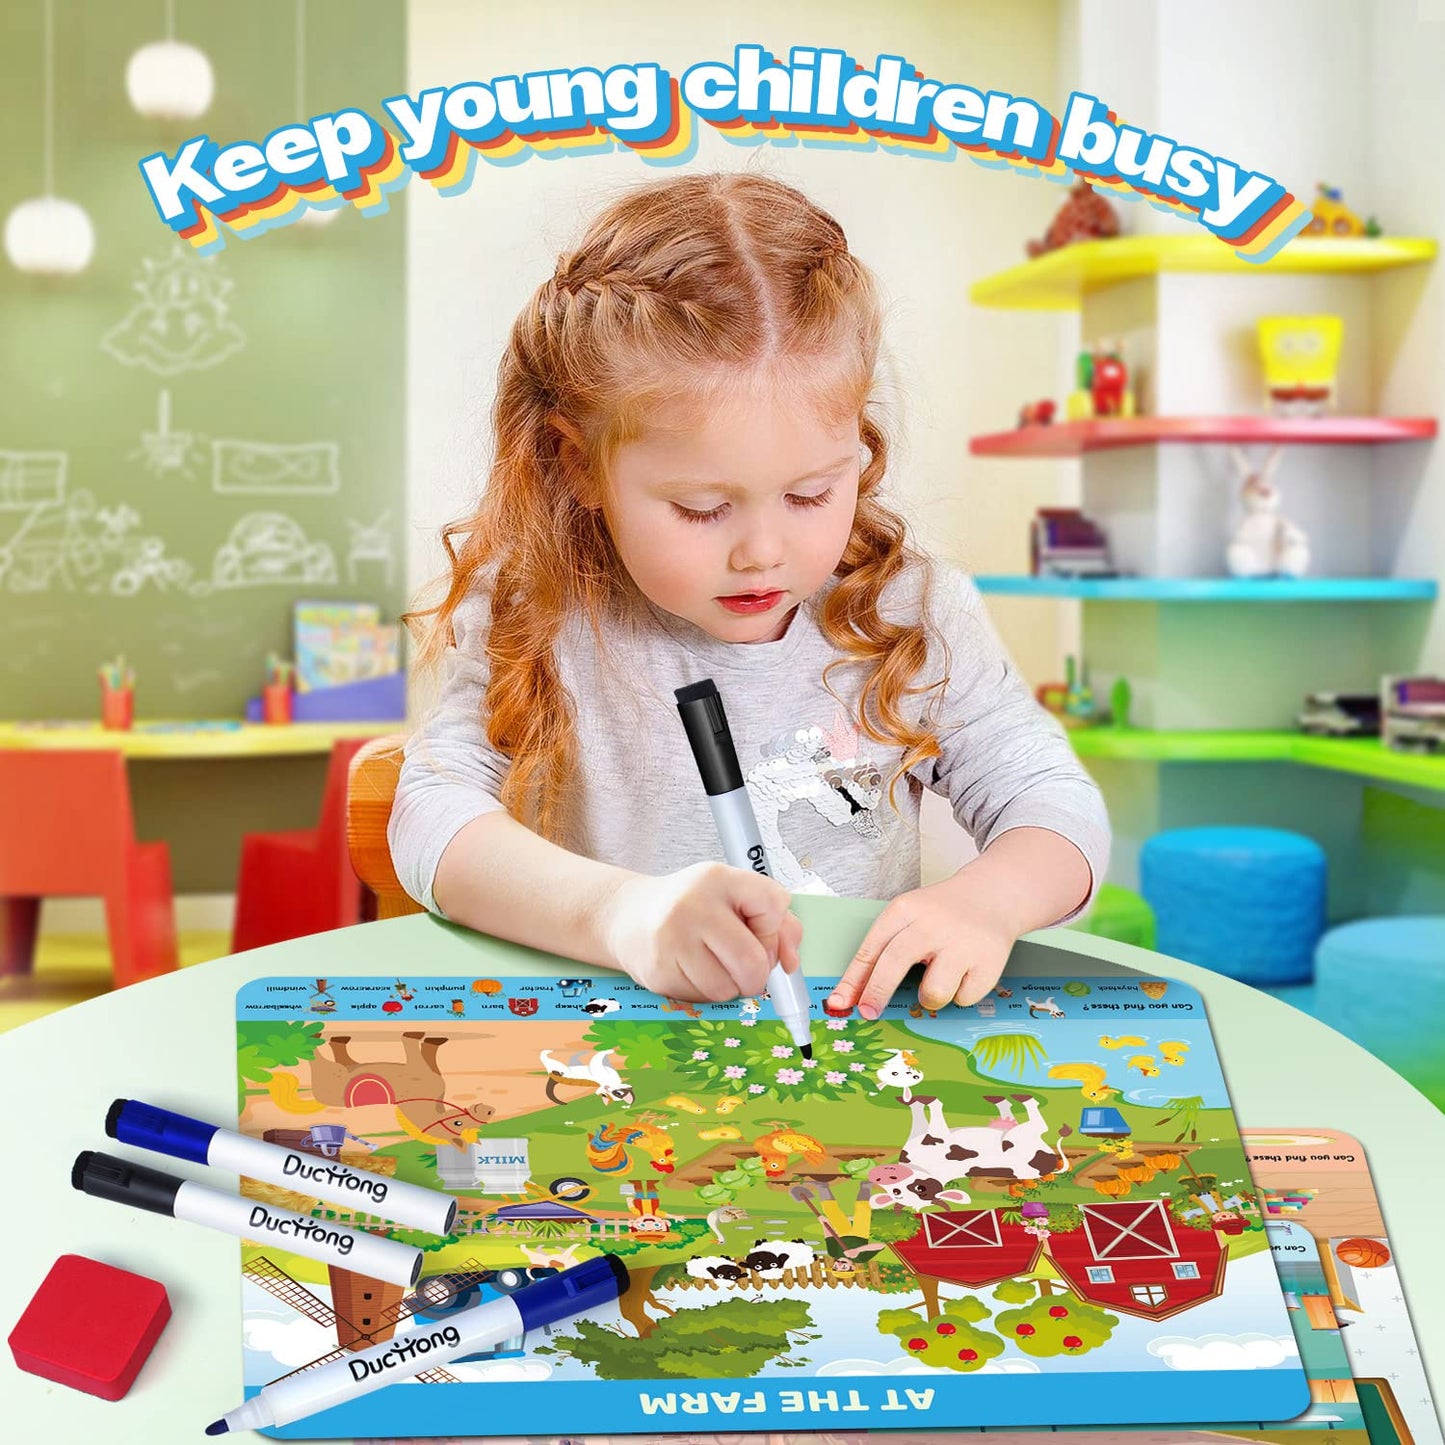 DUCHONG Preschool Learning Activity, Search and Find Cards Educational Game, Learning Toys for Ages 3-5, Gifts for 3,4,5 Years Old Boys and Girls